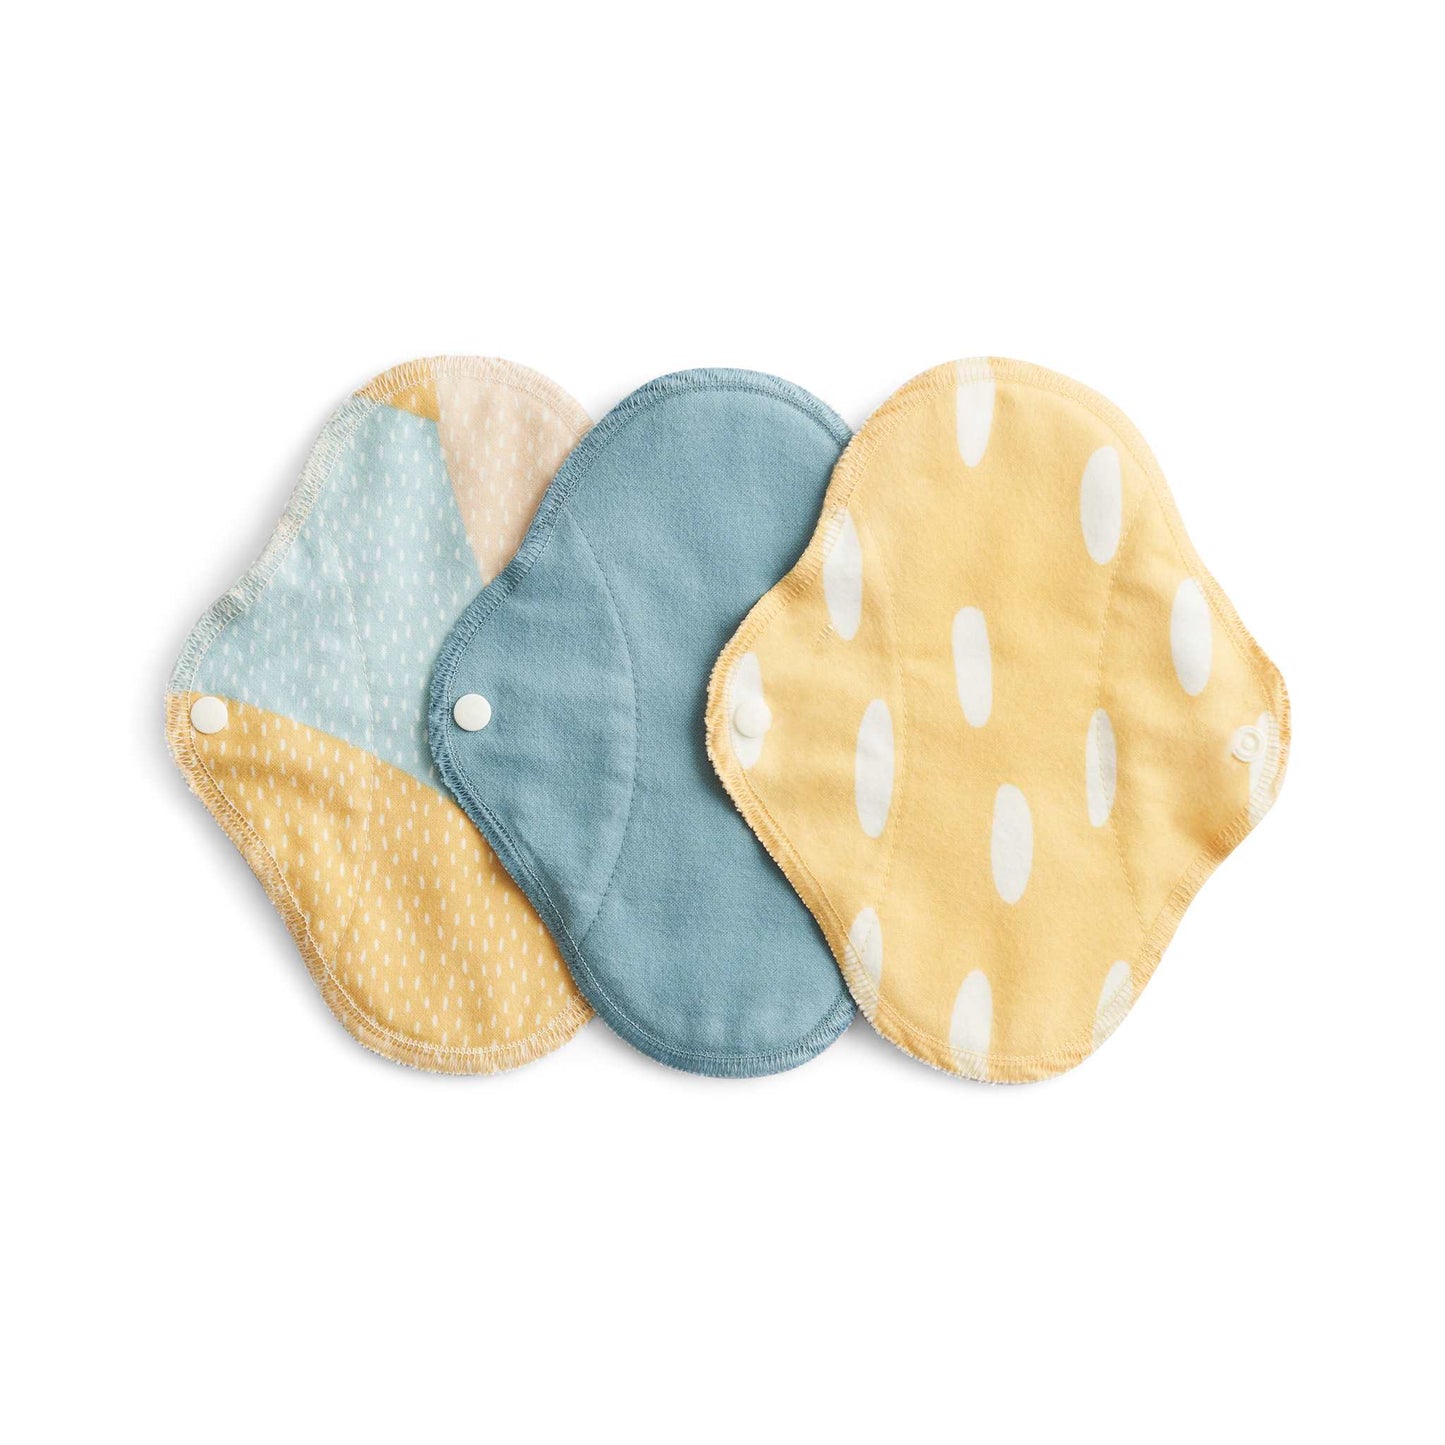 Imse Vimse Period Care Reusable Cloth Pantyliner 3-Pack  - Classic - Imse Vimse